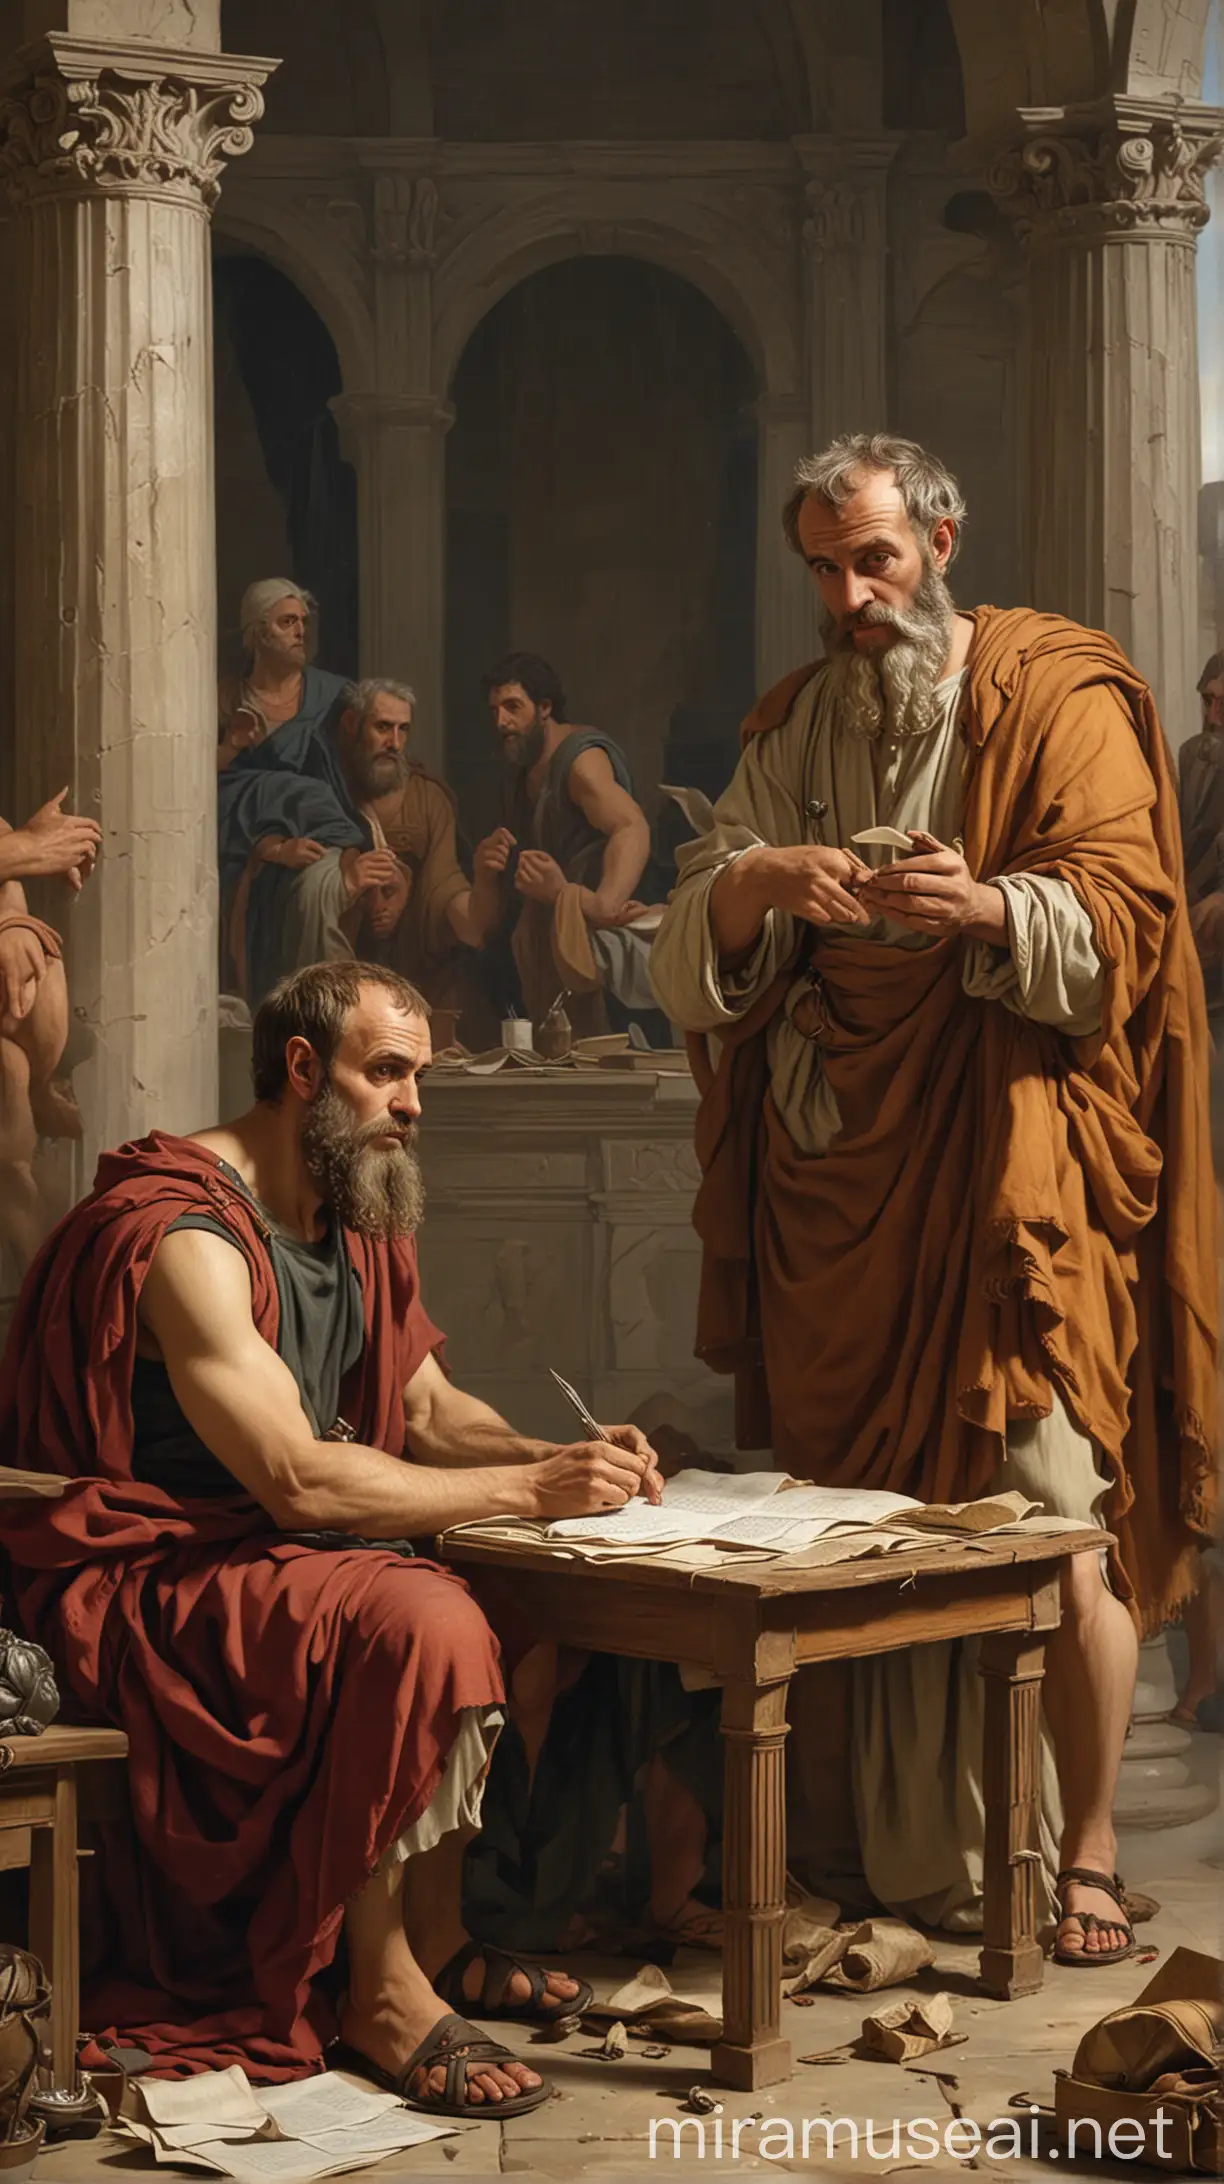 Apostle Paul Writing a Letter with Philetus and Hymenaeus in the Background